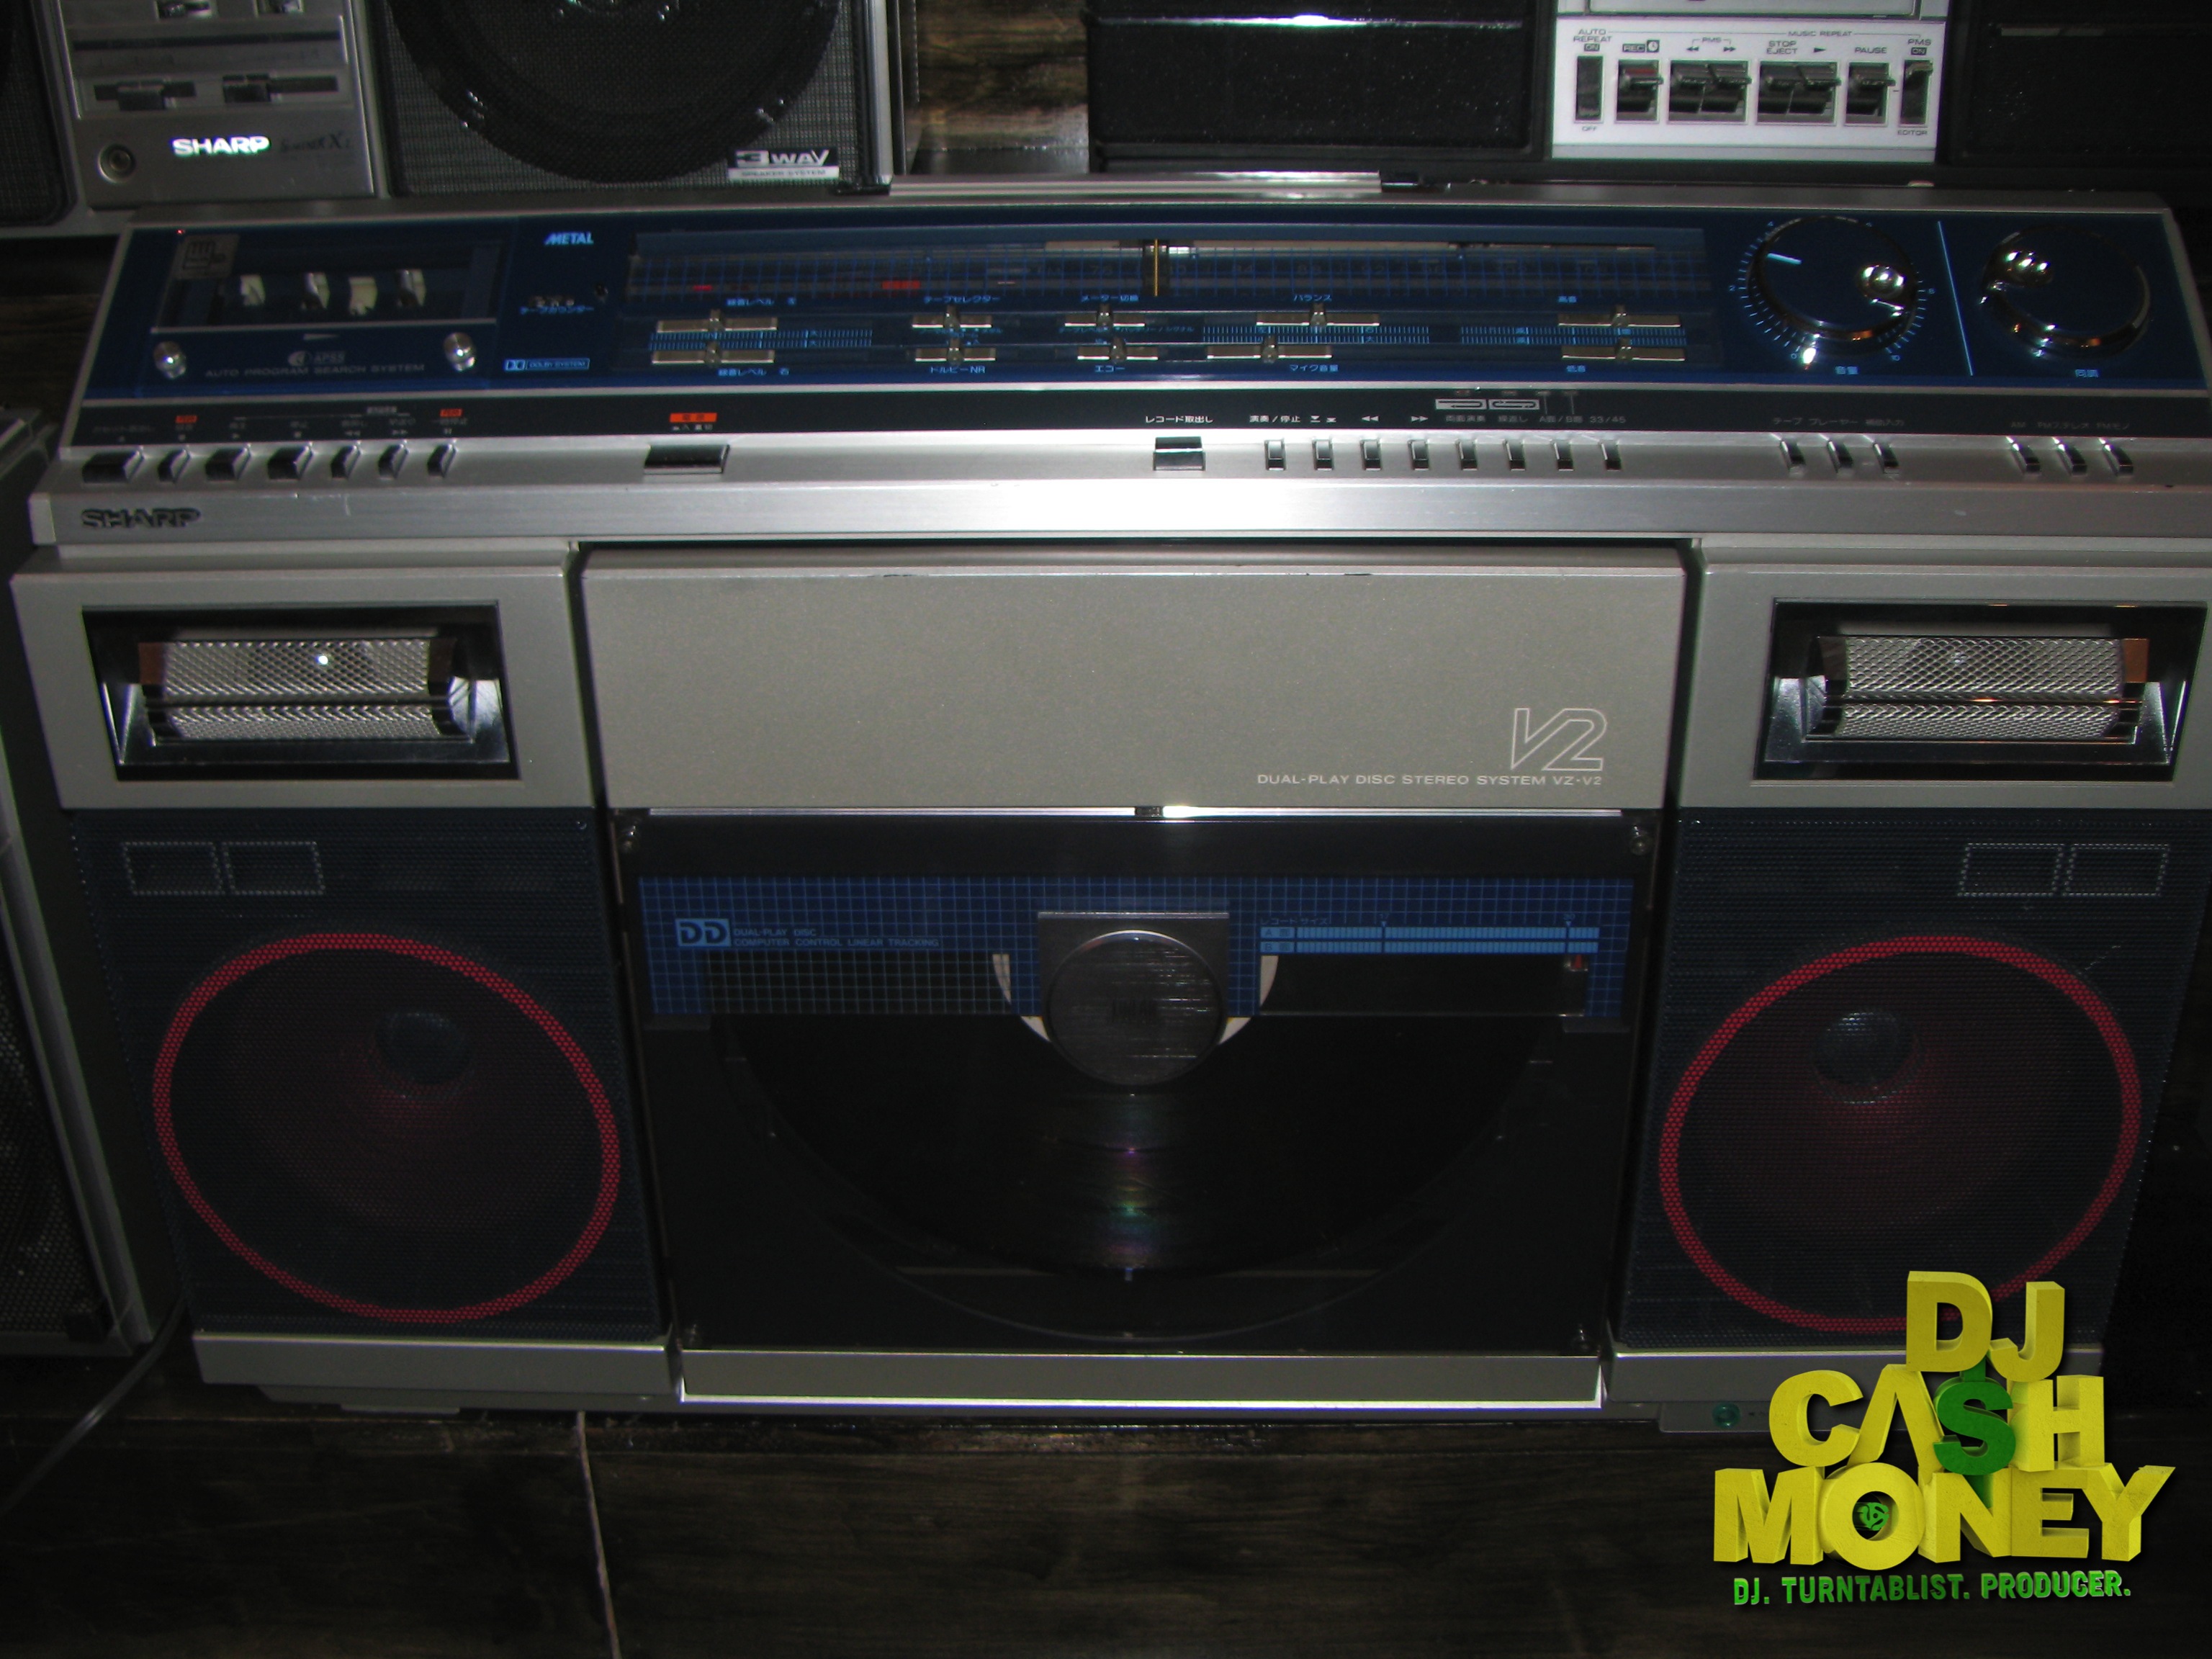 Another classic boombox from Sharp